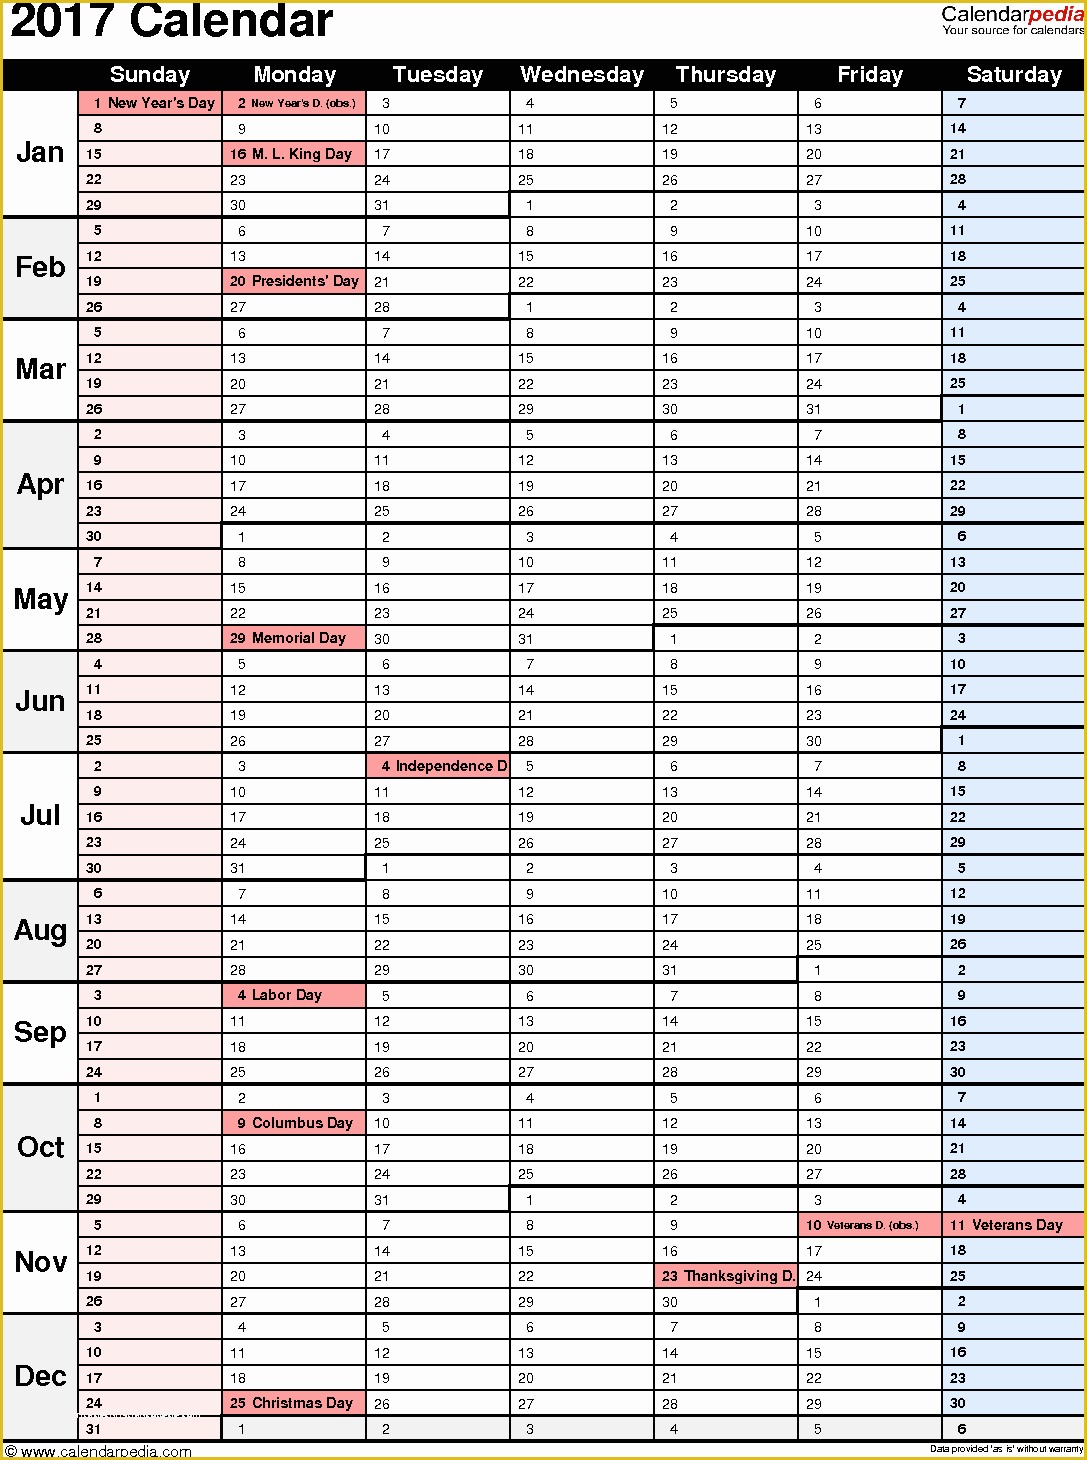 Free Annual Leave Spreadsheet Excel Template Of Annual Leave Planner Template 2017